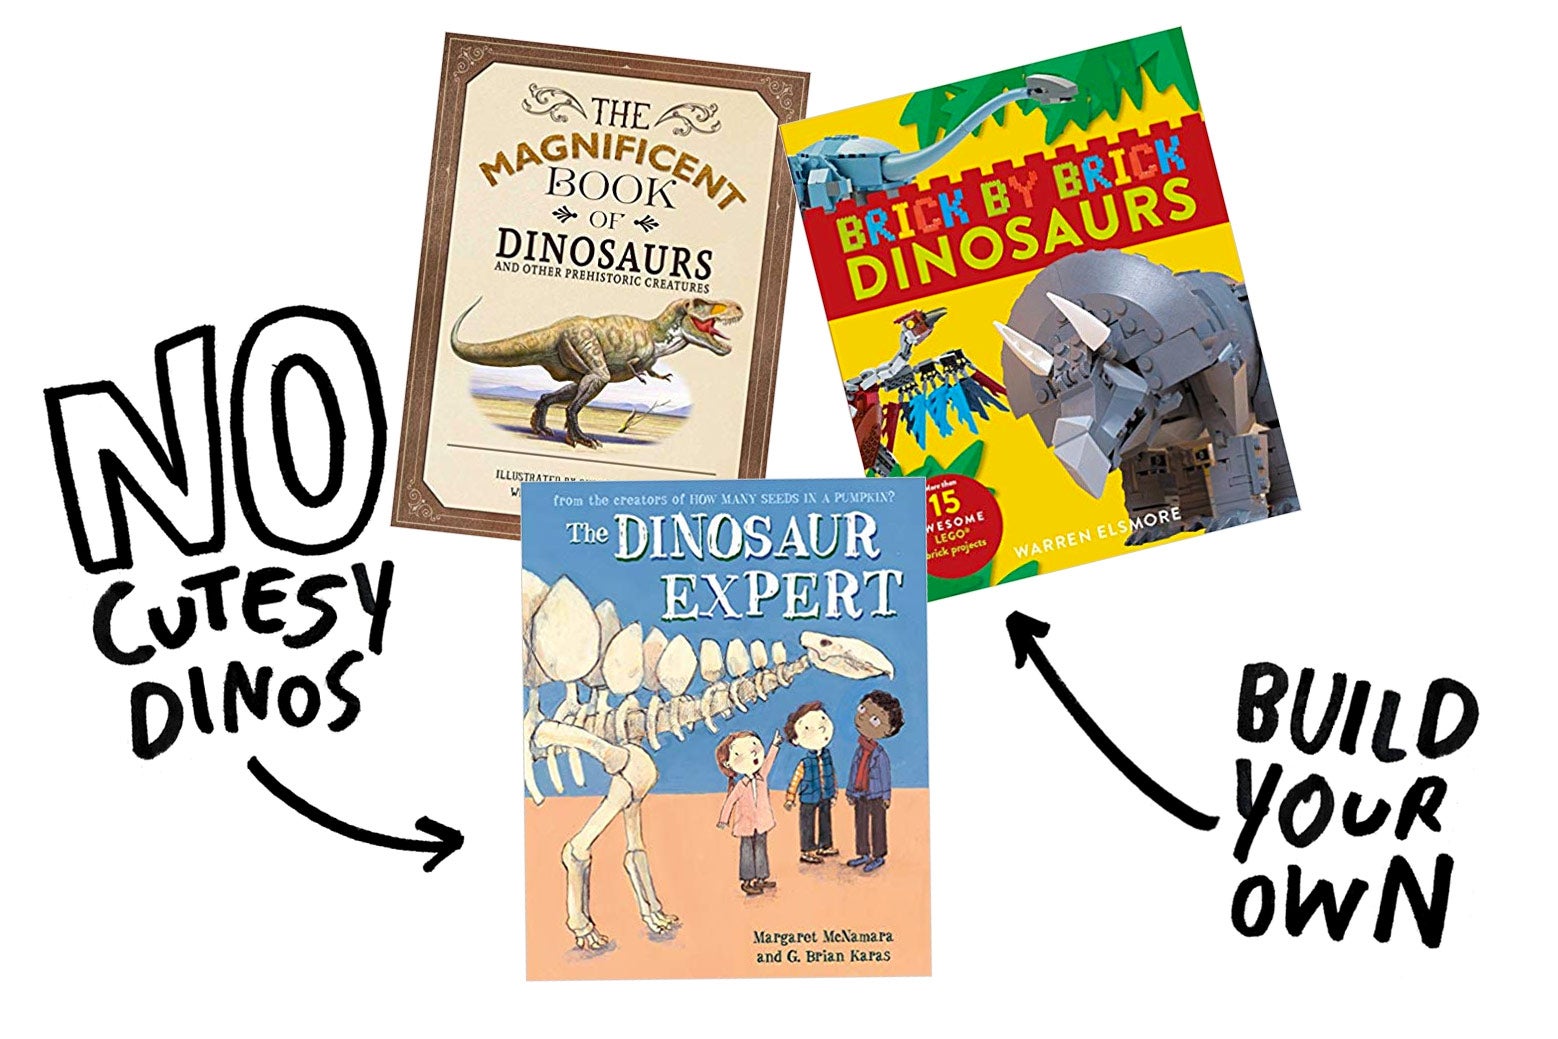 Arrows pointing away from The Dinosaur Expert ("No Cutesy Dinos") and Brick by Brick Dinosaurs ("Build Your Own")